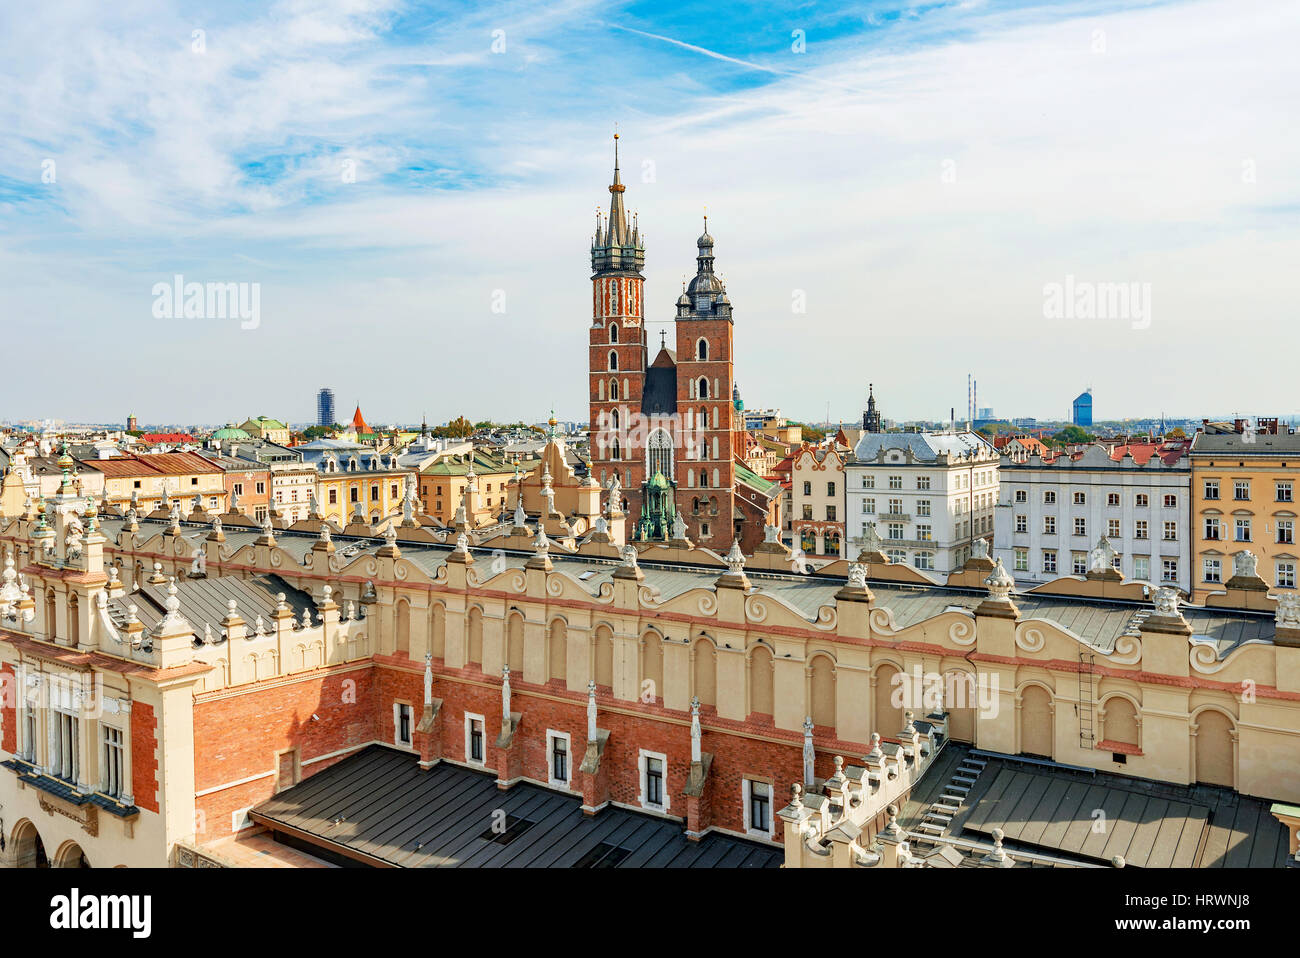 View of Krakow old town architecture Stock Photo